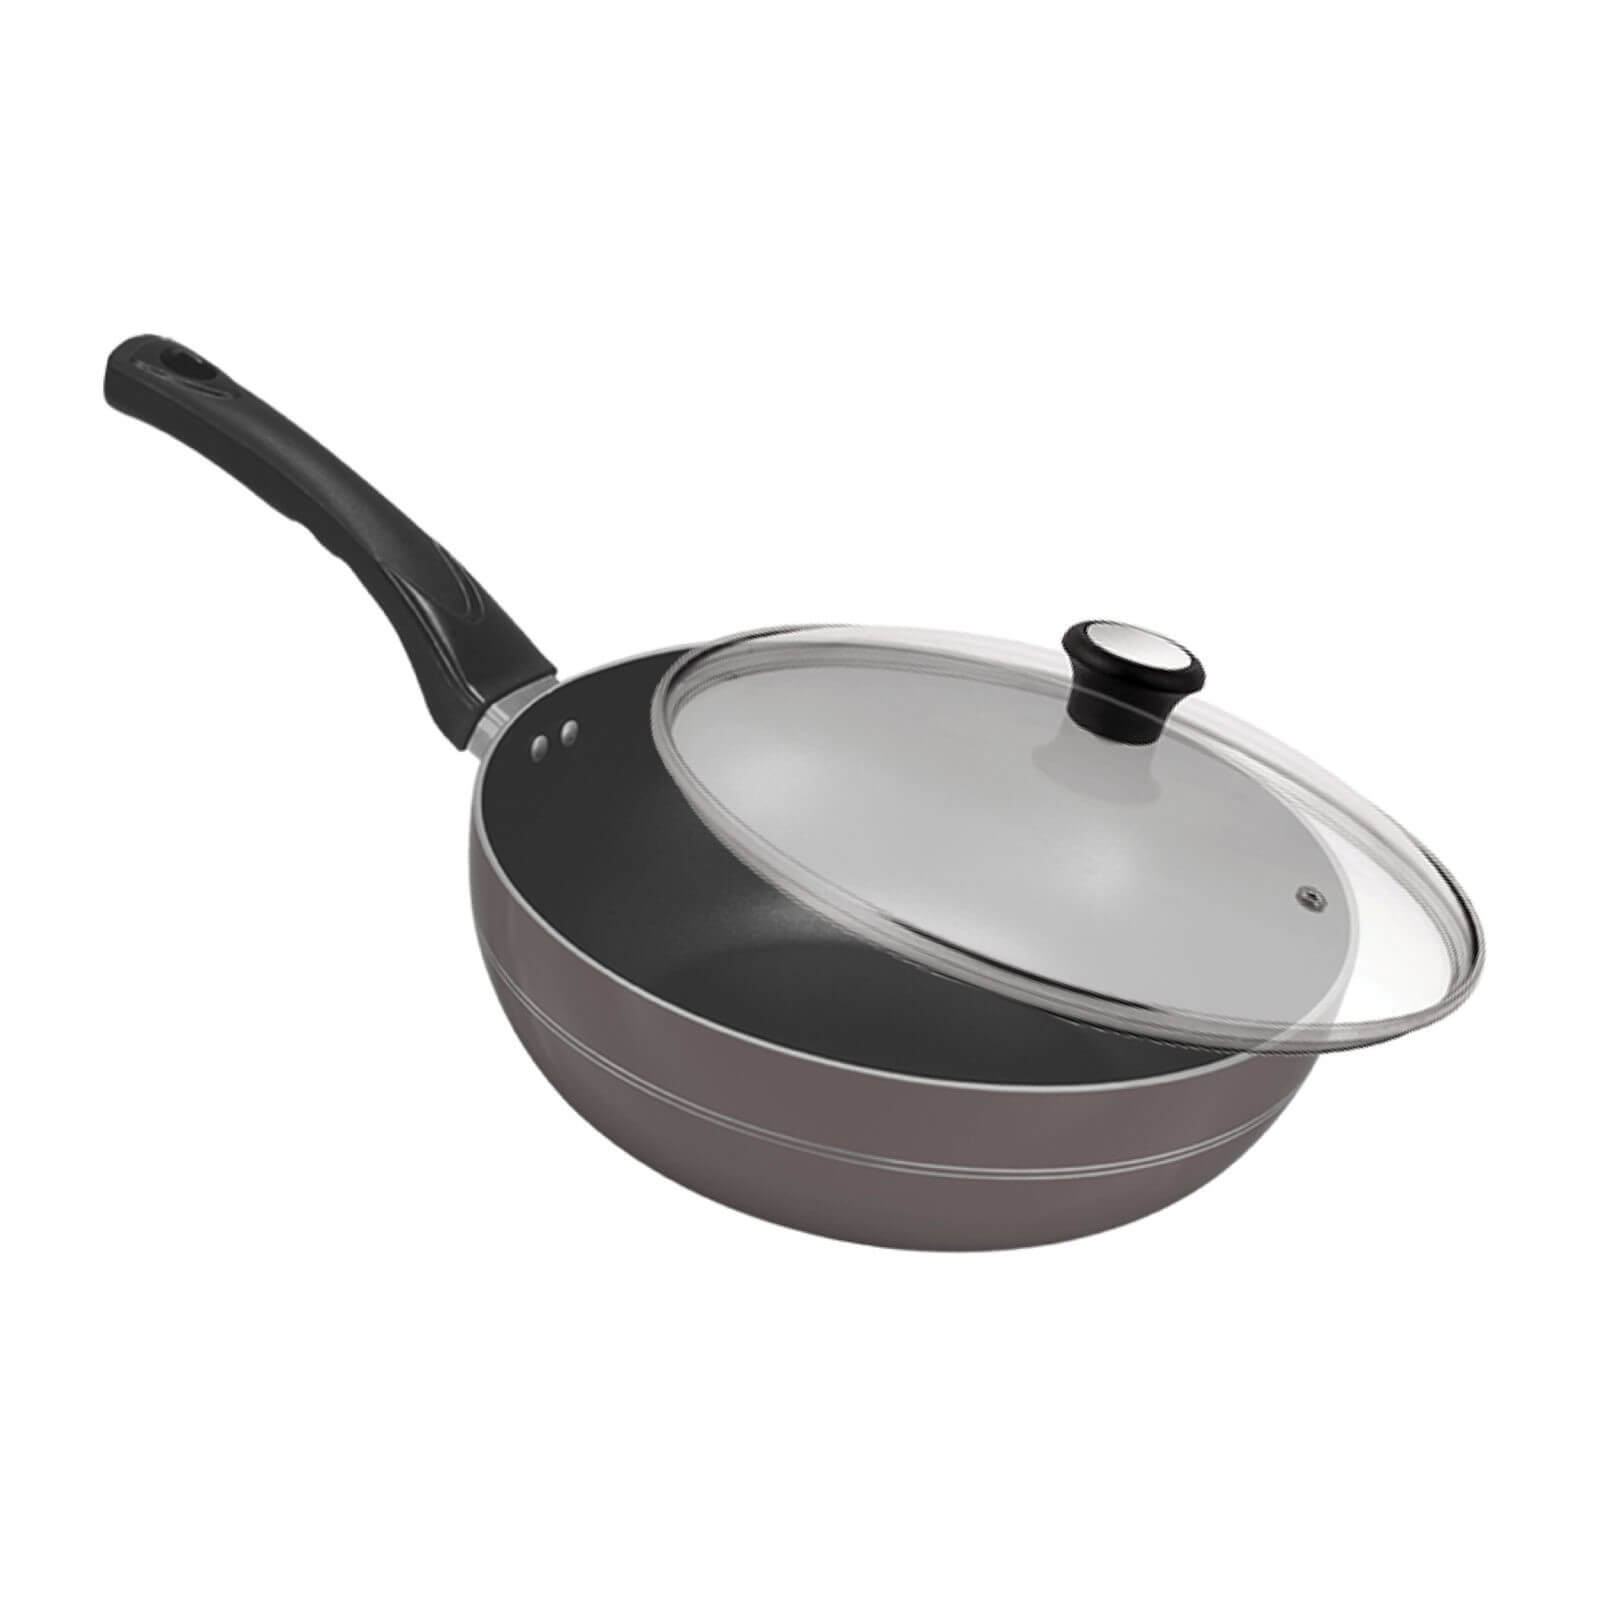 chef best non stick deep frying pan - majestic chef